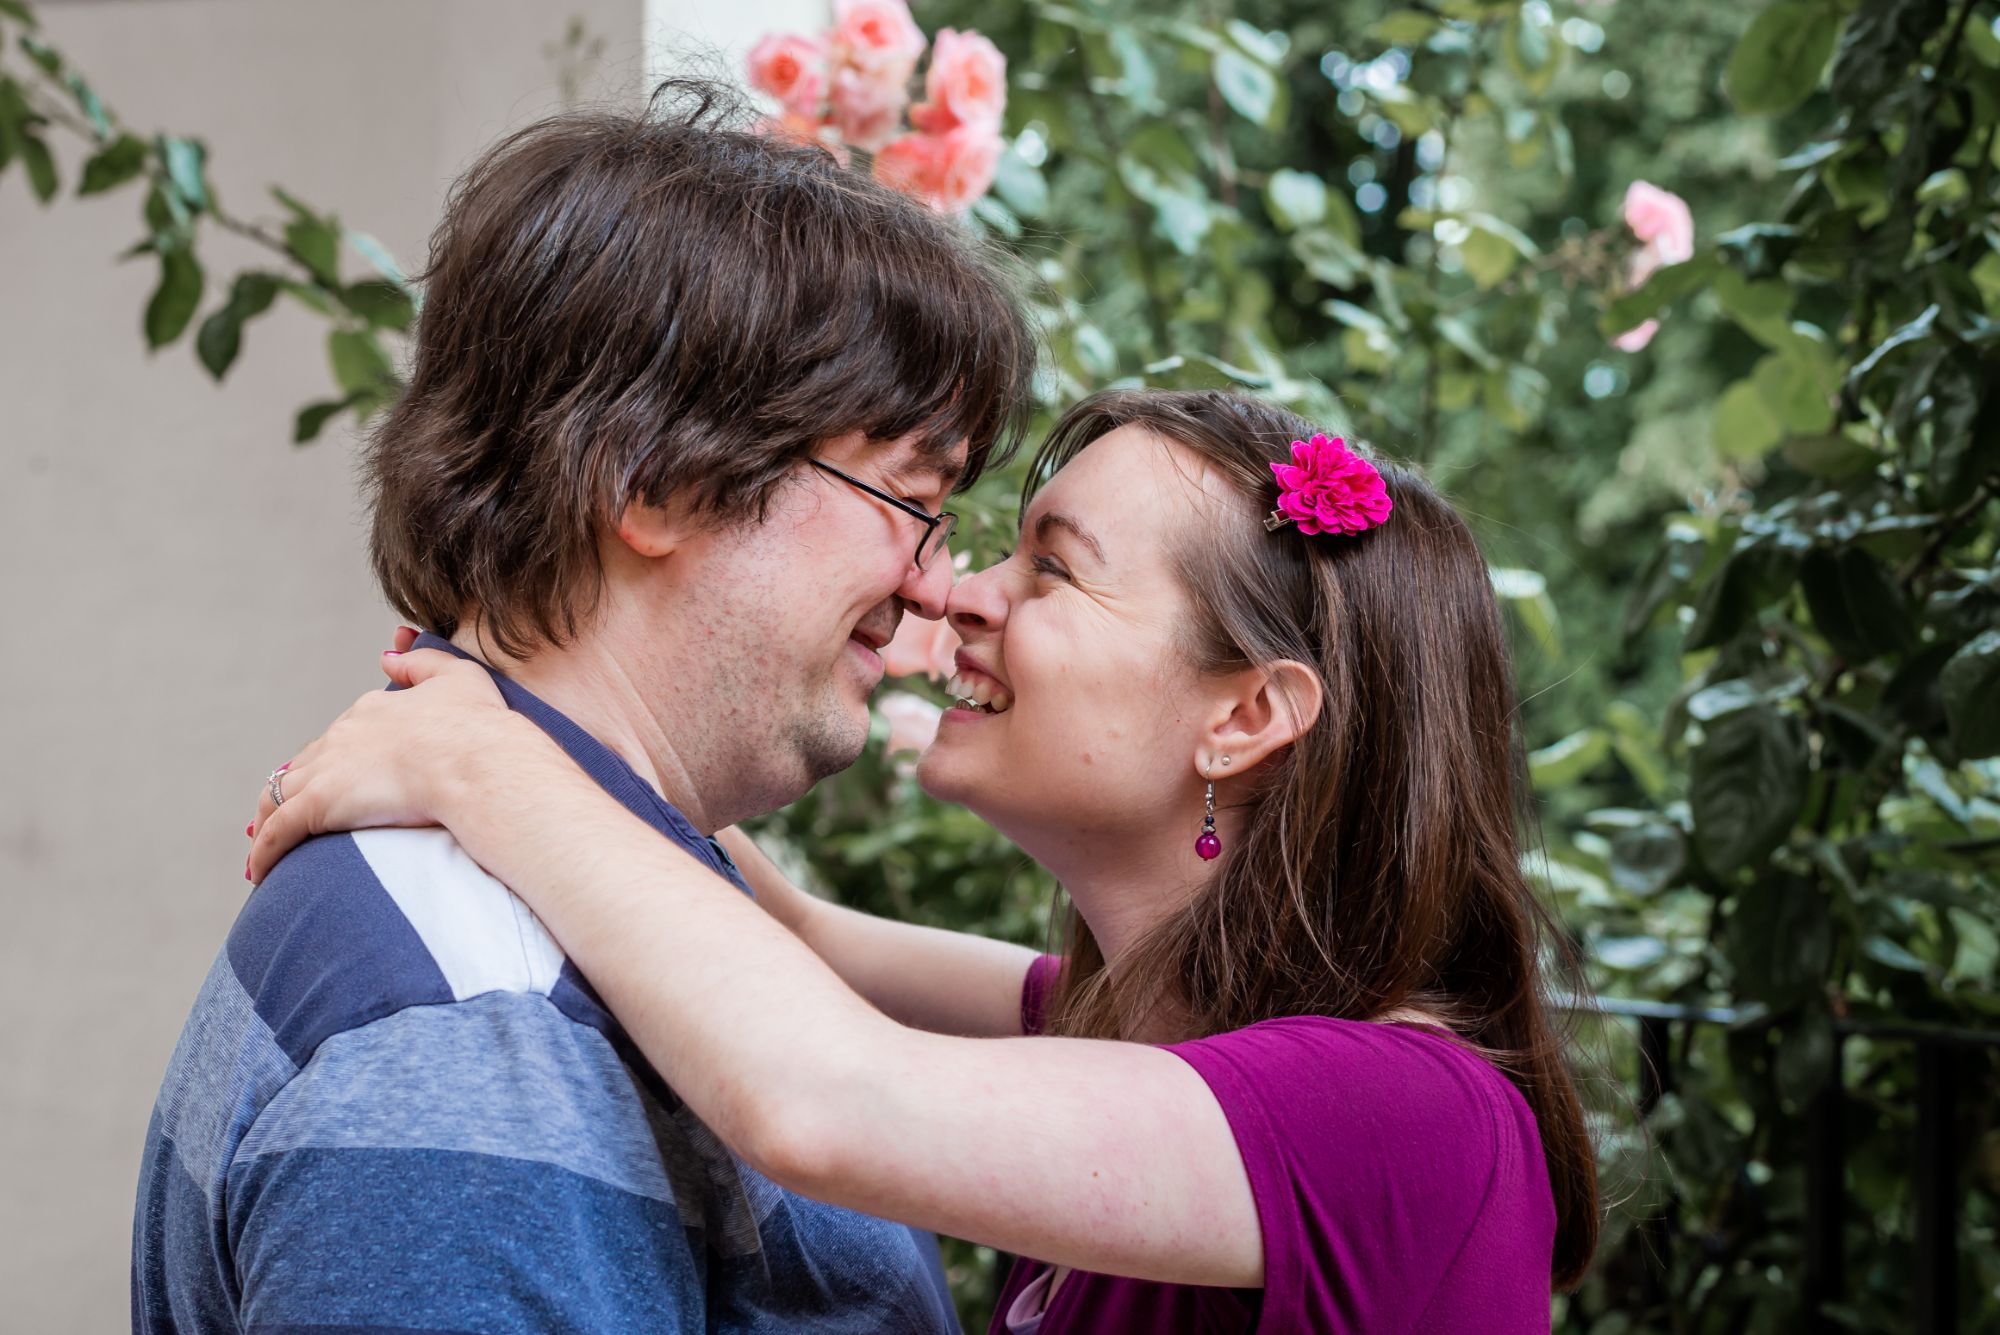 A man and lady touch noses and giggle at their engagement session. She has her arms wrapped around his shoulders and there's roses in the background